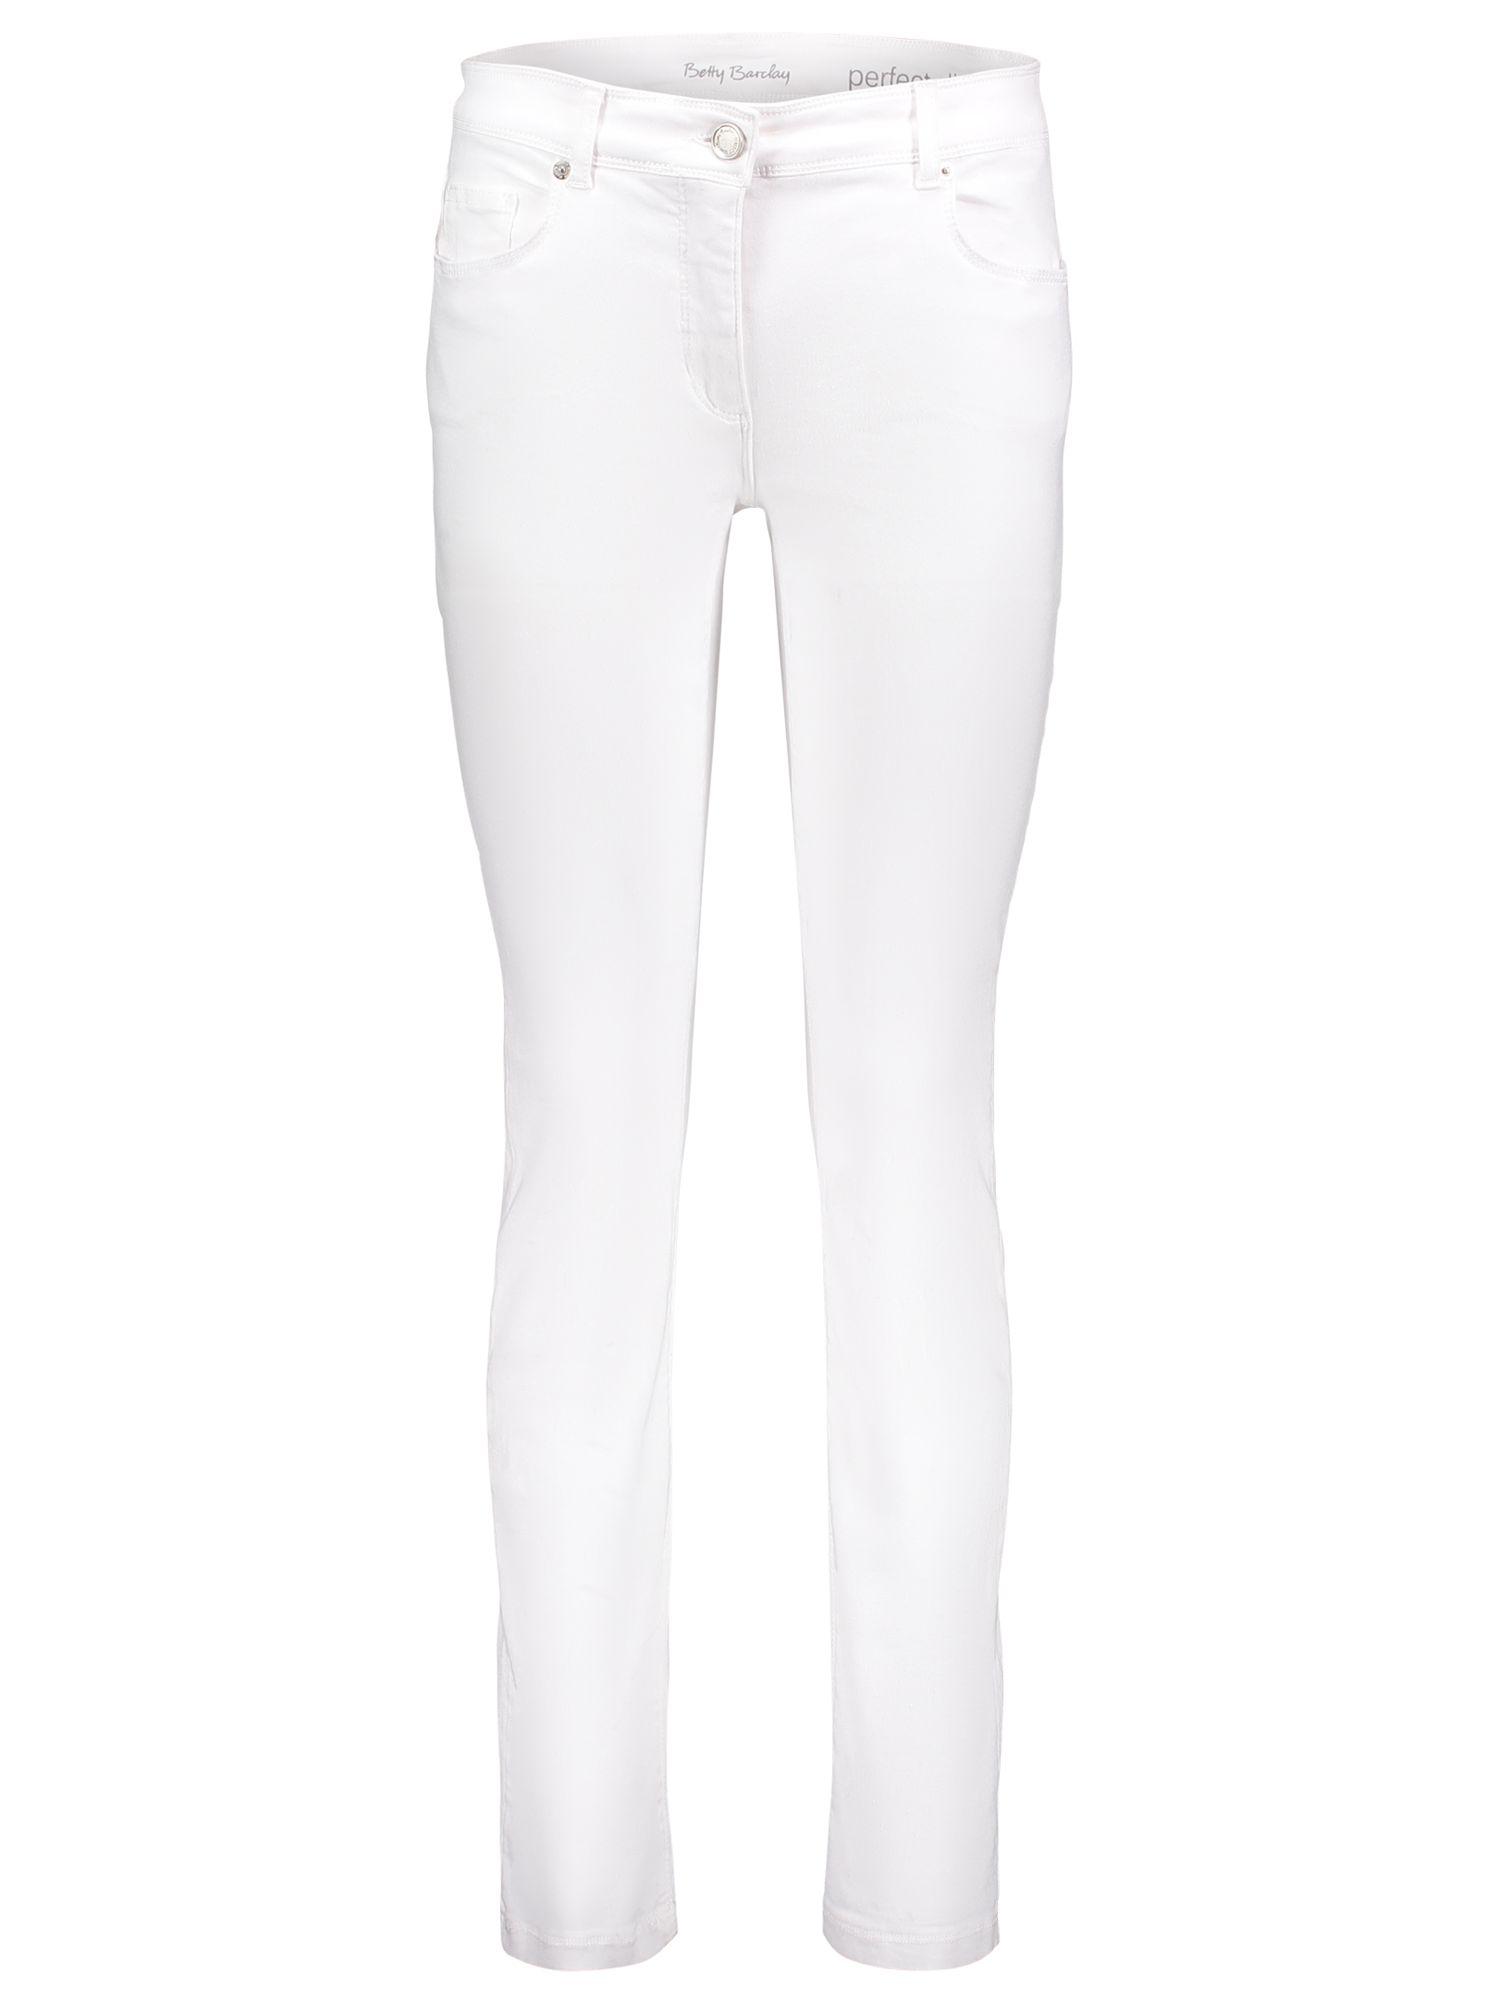 betty barclay jeans perfect slim